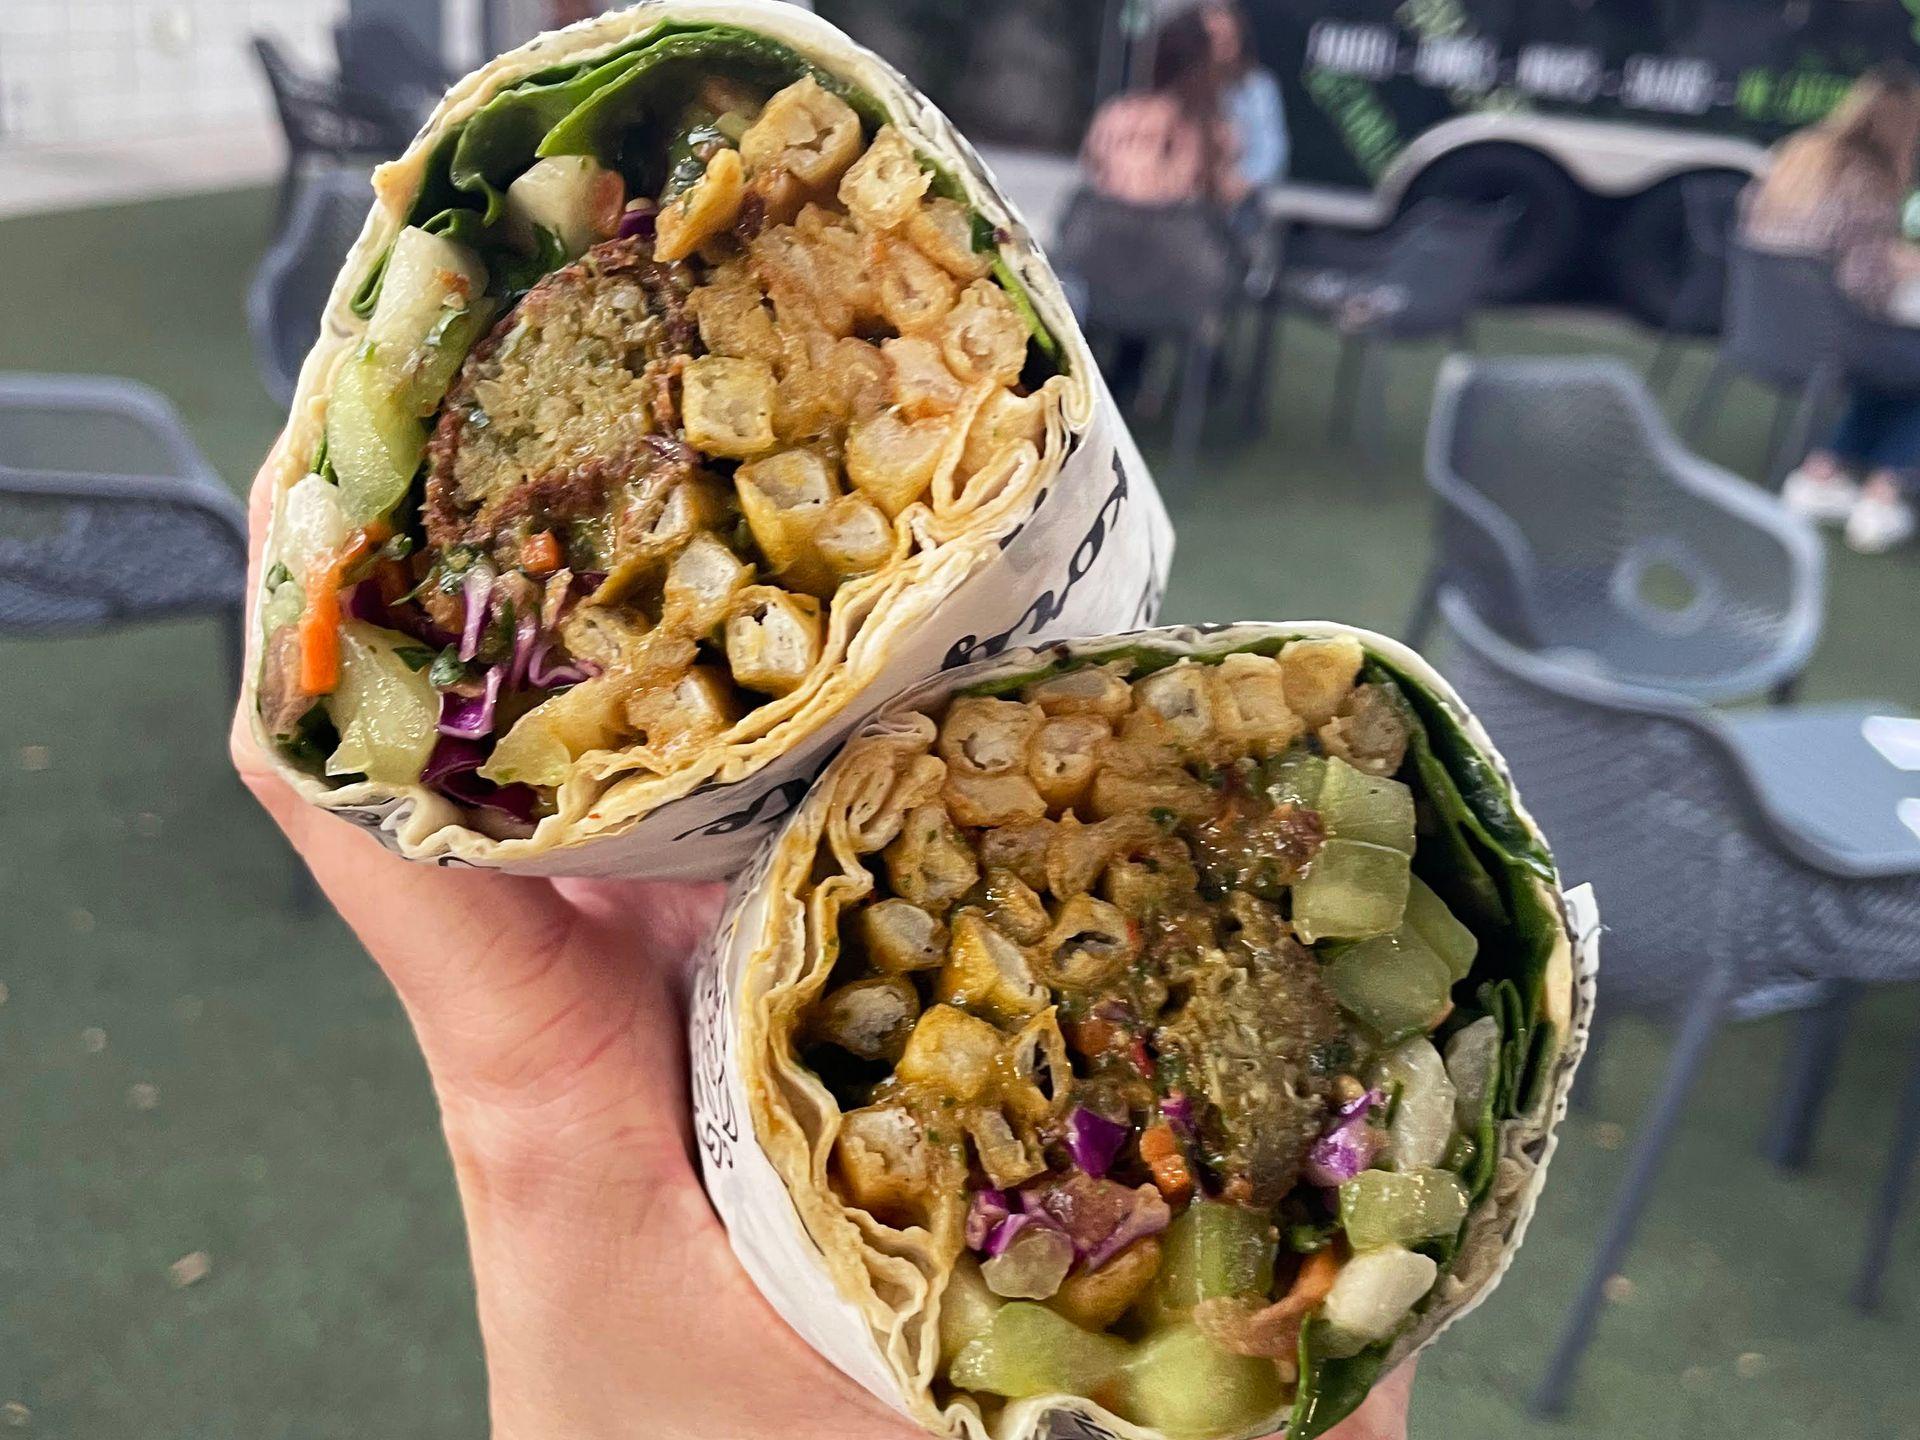 A close up of a burrito cut in half. Inside there is falafel, french fries and veggies.